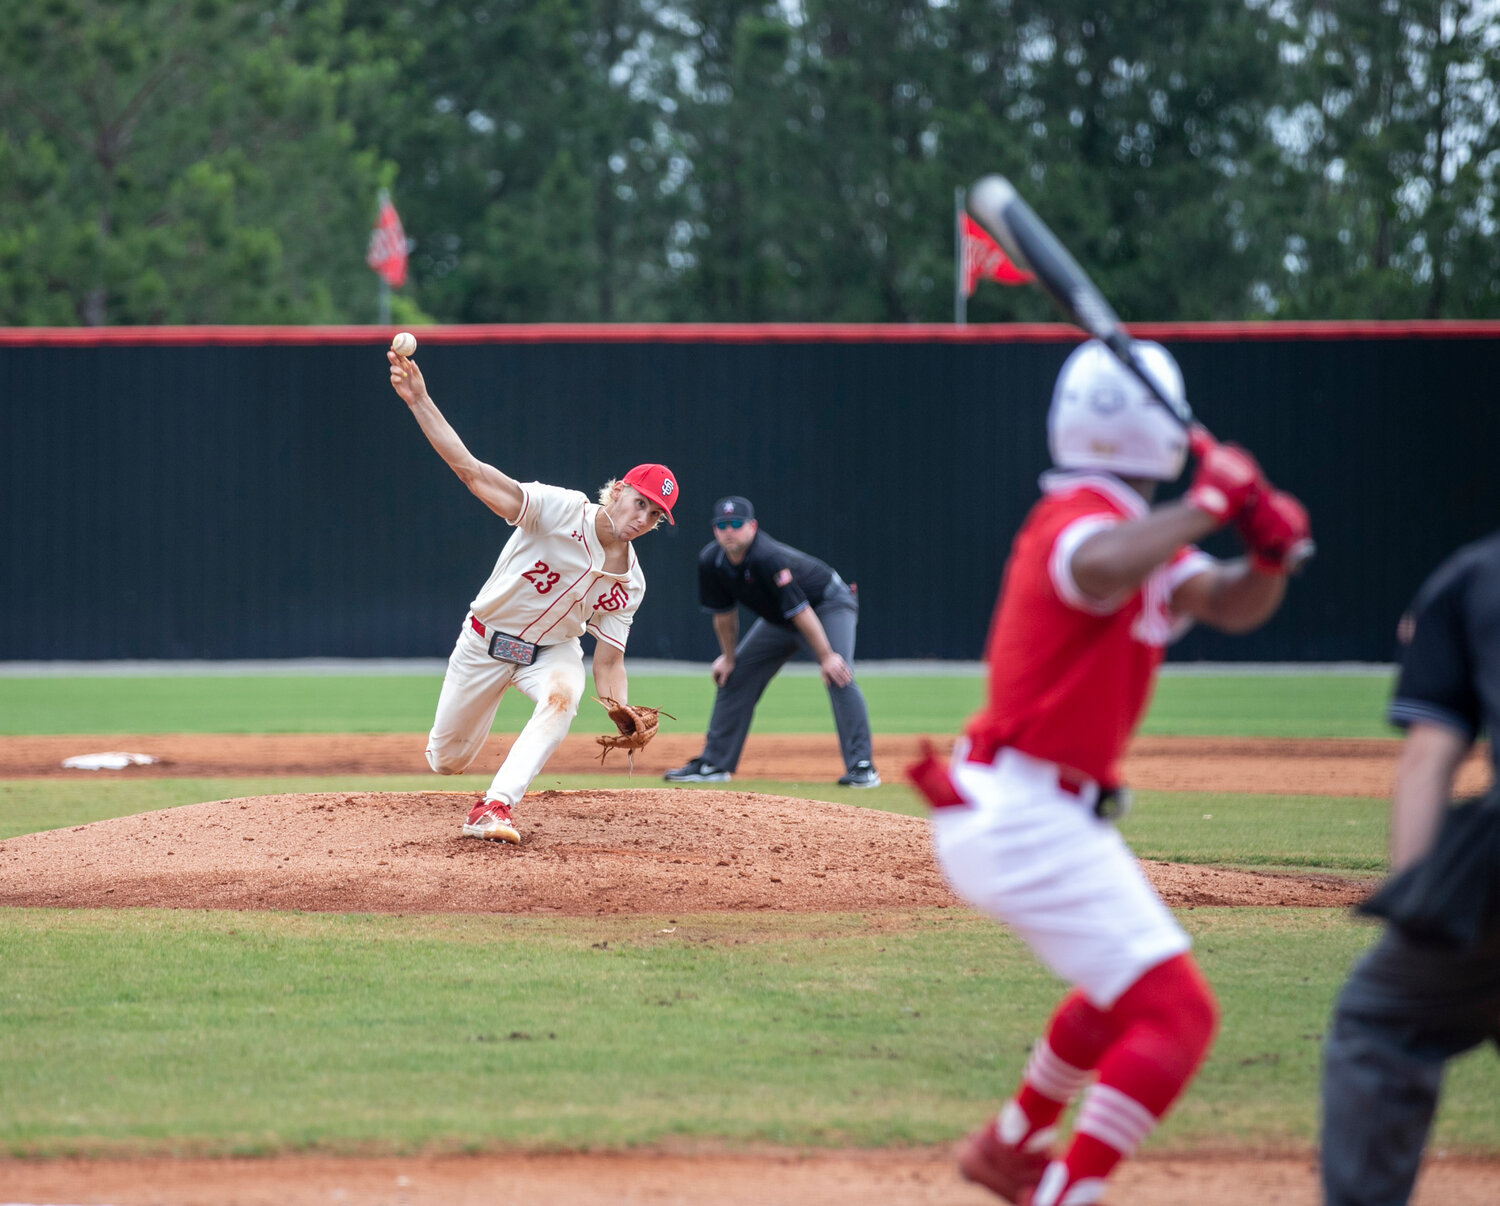 Toro senior DJ Eurgil fires a pitch during the first inning of his start against Saraland in the AHSAA state quarterfinals Saturday, May 6. Eurgil provided the walk-off hit in extra innings of Game 2 Thursday night to extend Spanish Fort’s postseason.